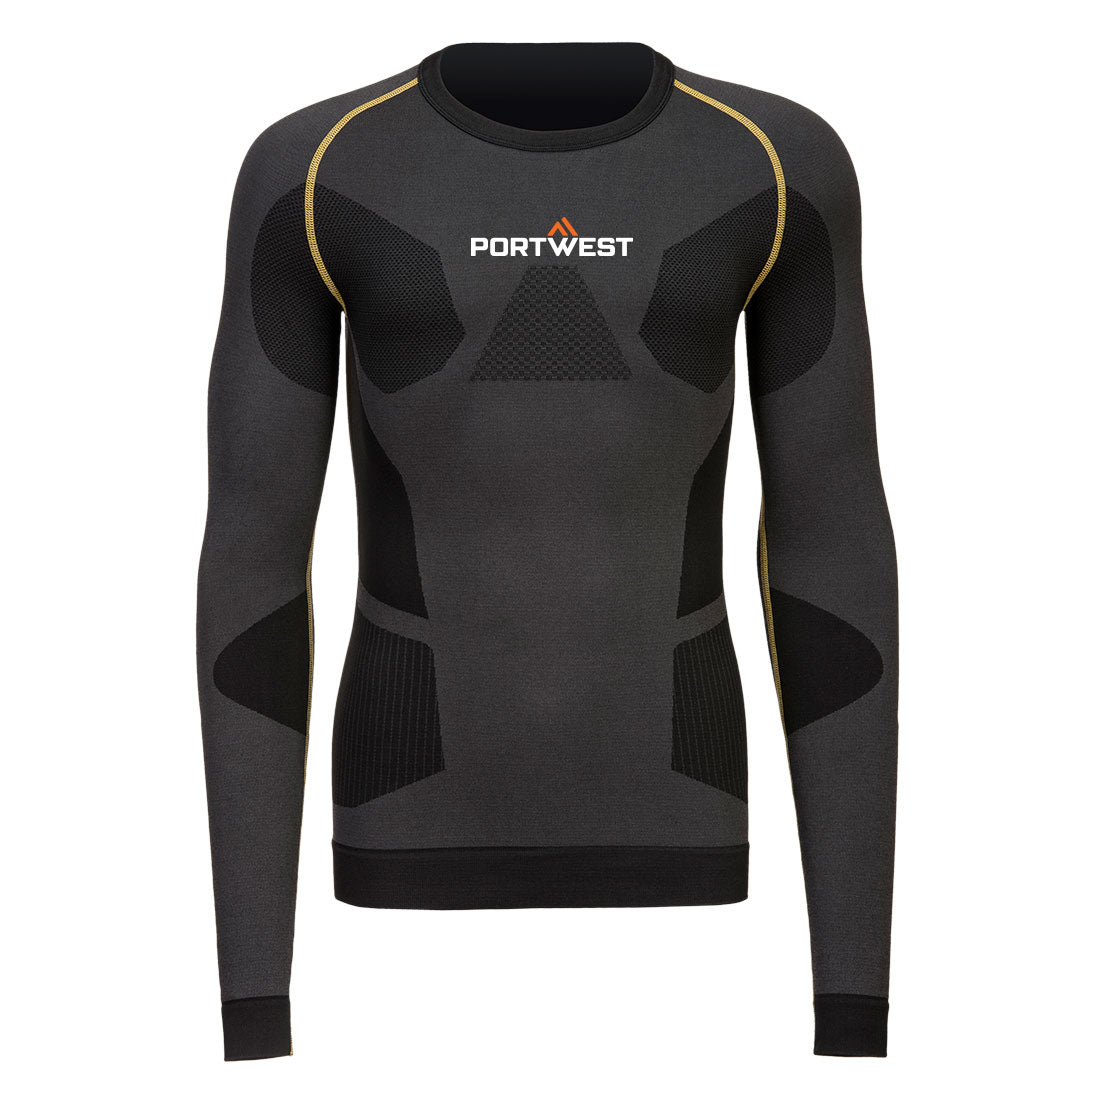 Portwest B173 DynamicAir Baselayer Top Wicking Cooling Drying Thermal Protection - Hamtons Direct